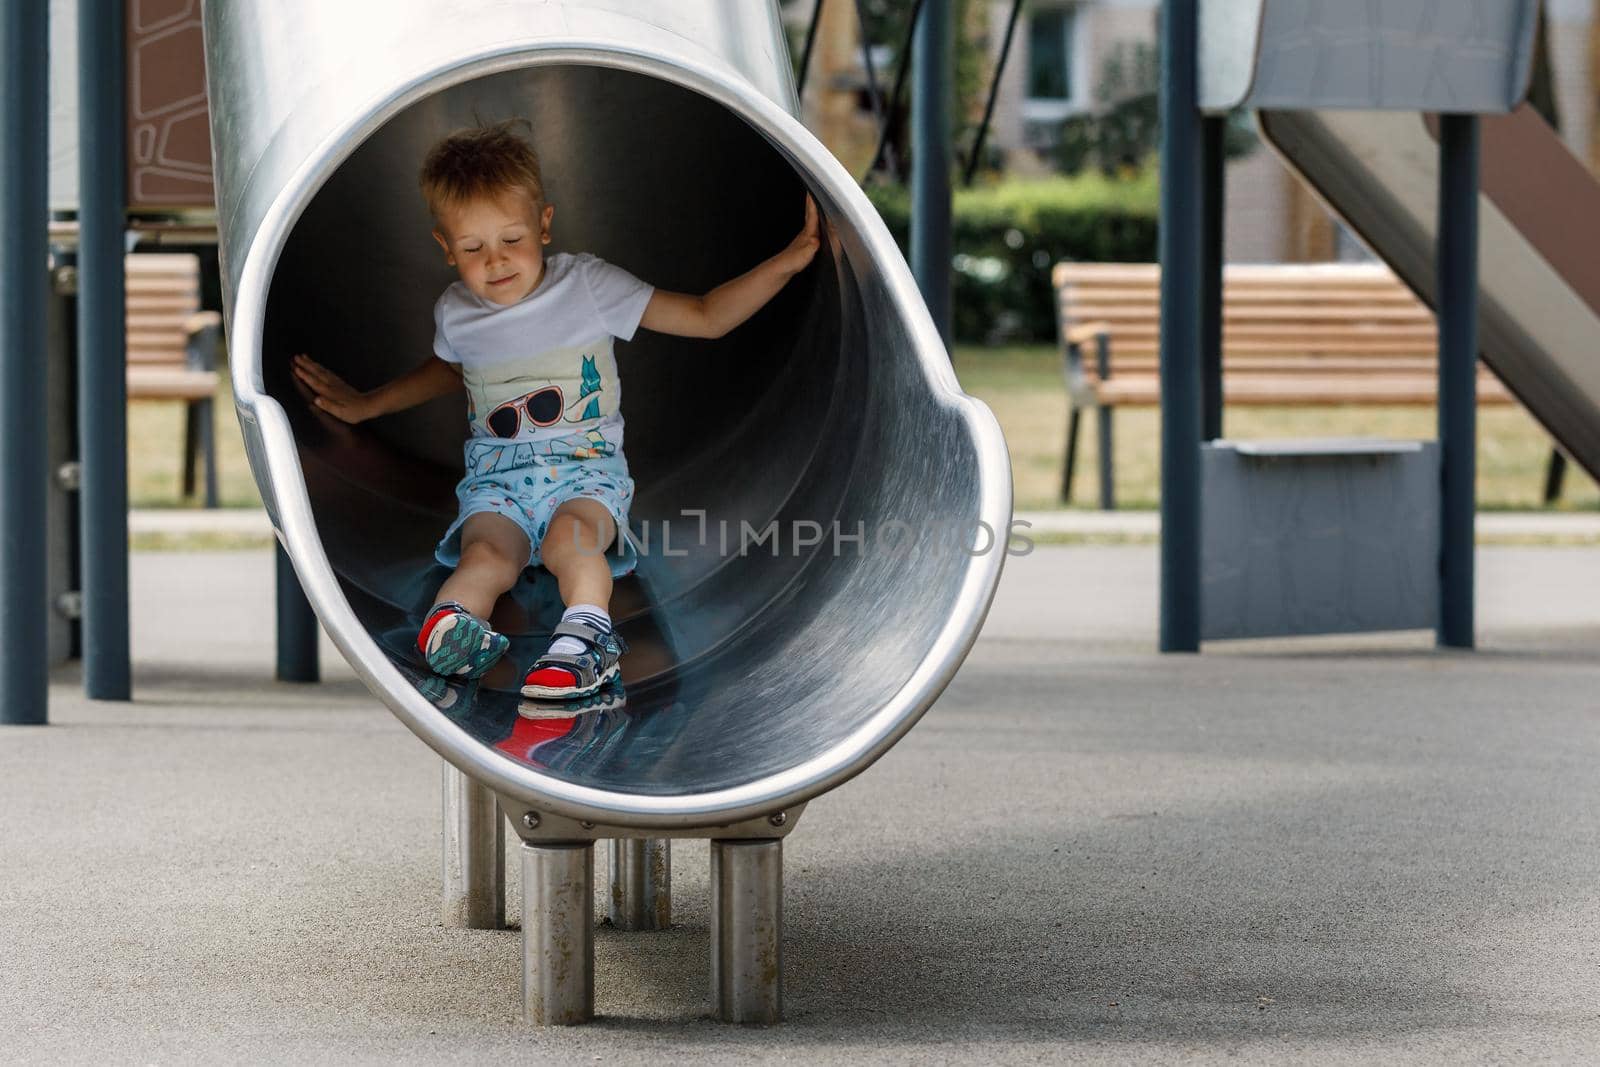 Boy in a white t-shirt blonde, riding on a metal slide tube on the playground.